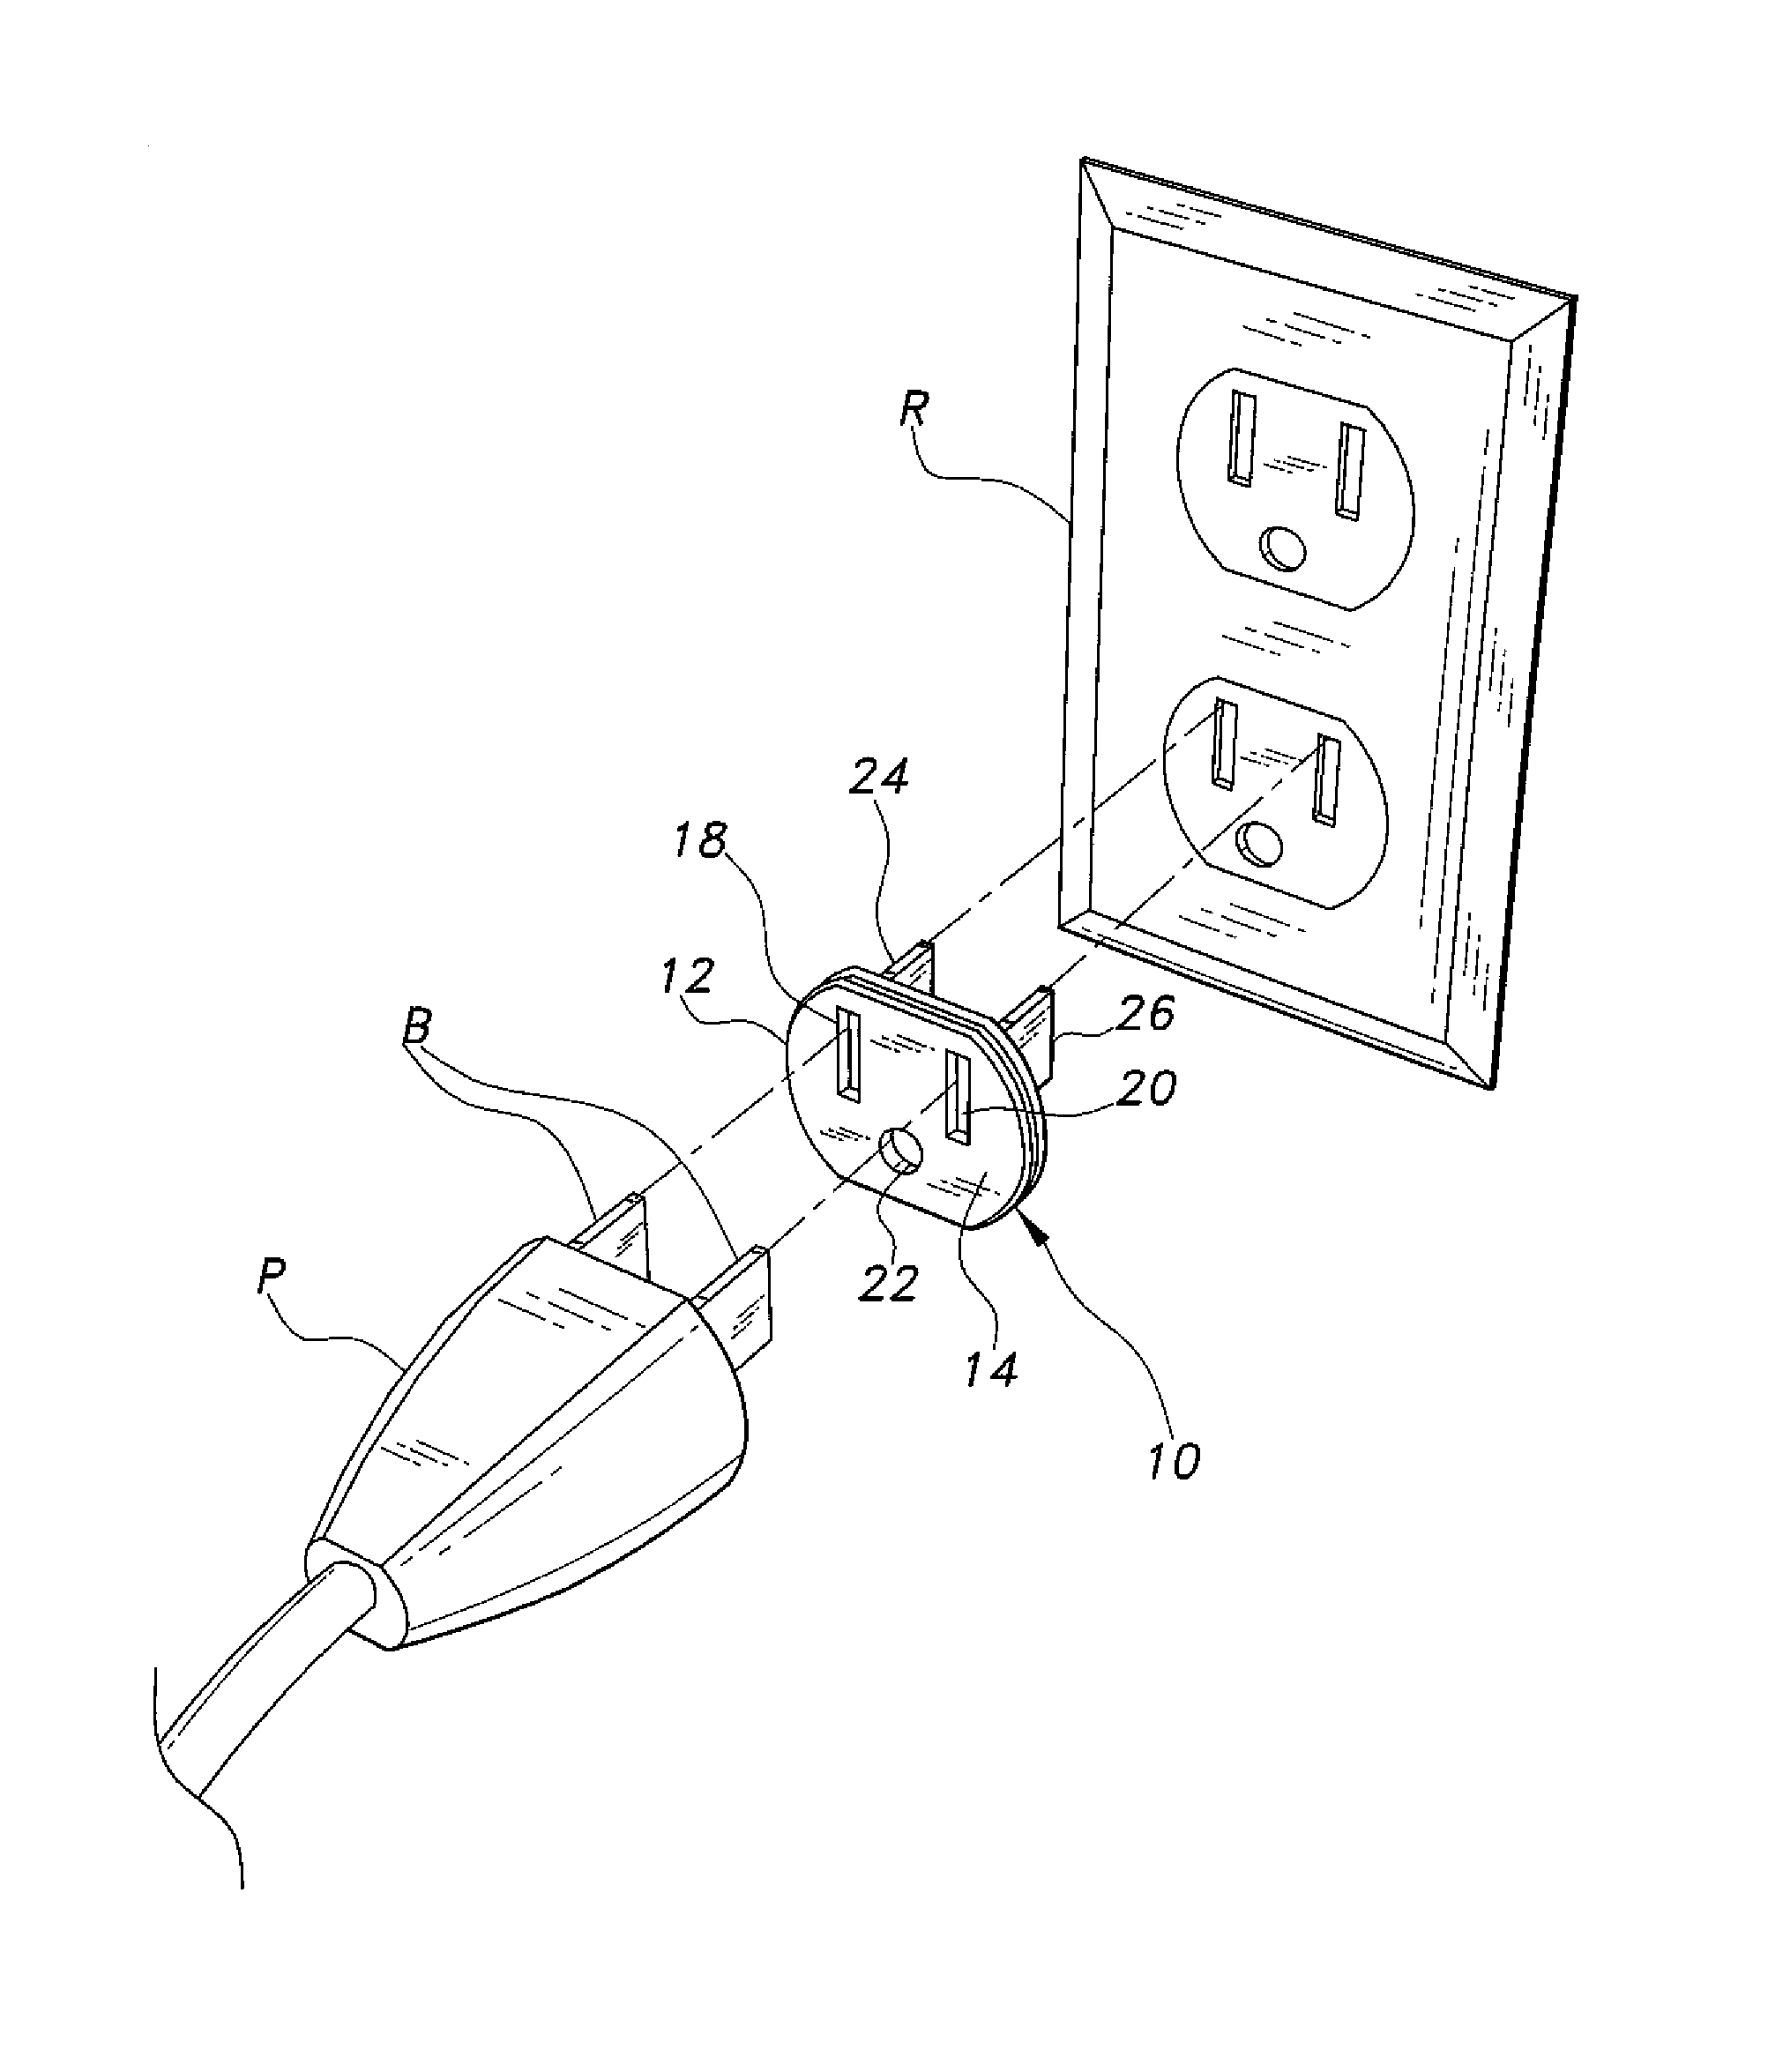 Electrical outlet safety device